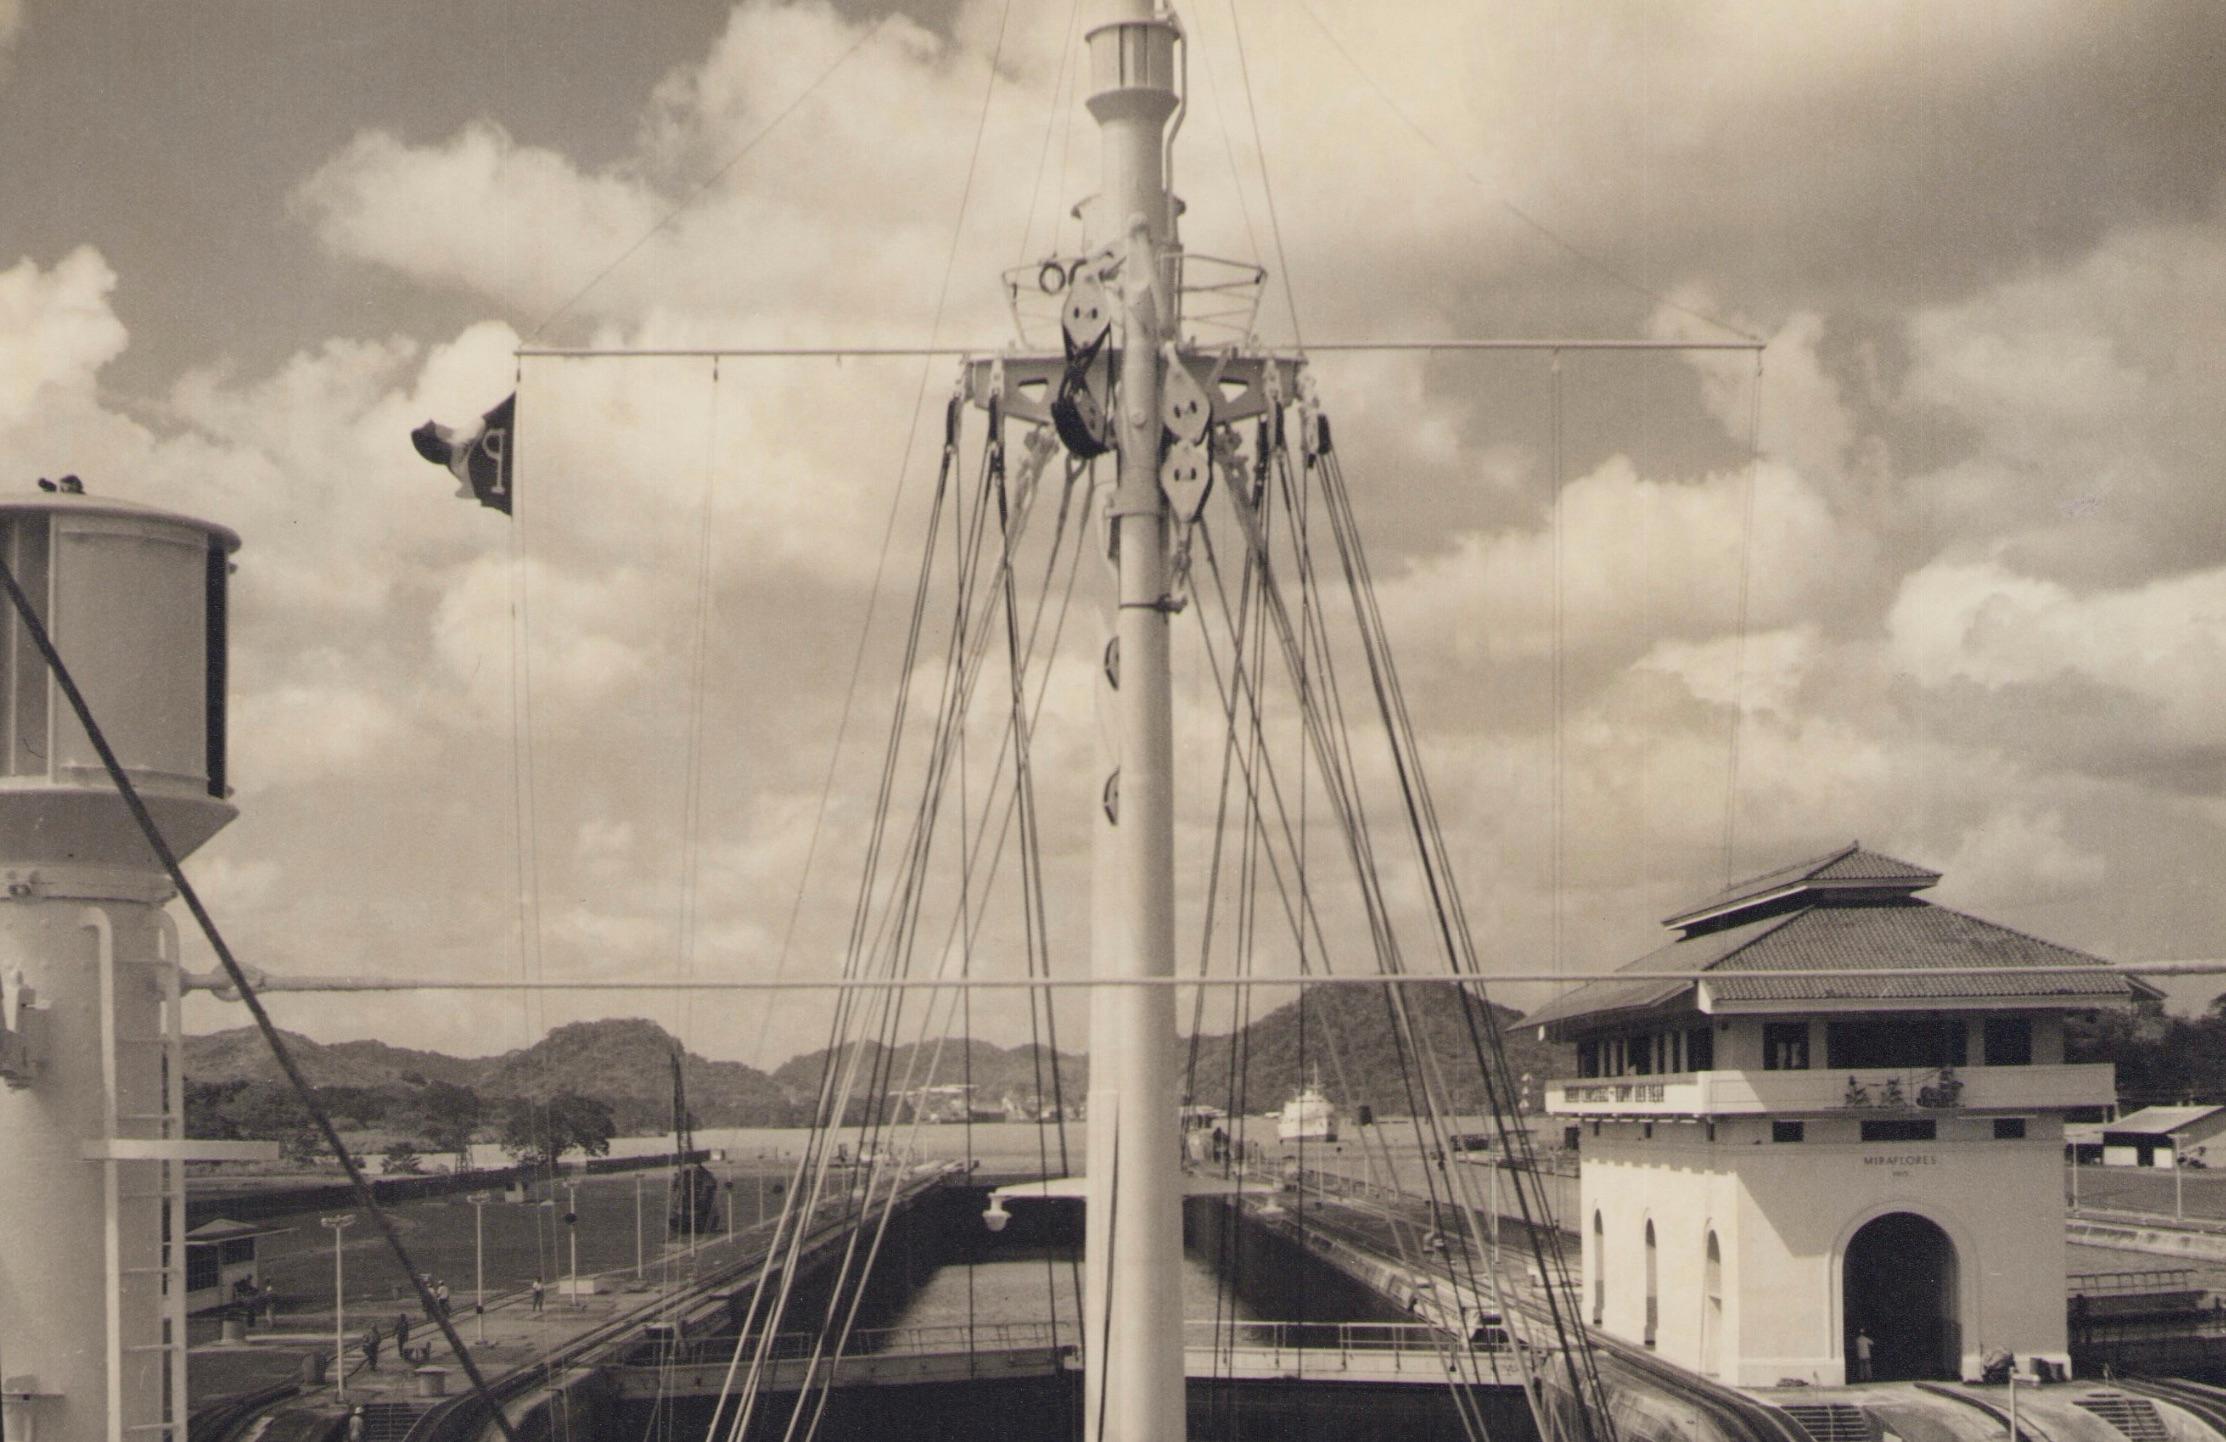 Panama, Ship, Black and White Photography, 1960s, 24, 3 x 24, 1 cm For Sale 2